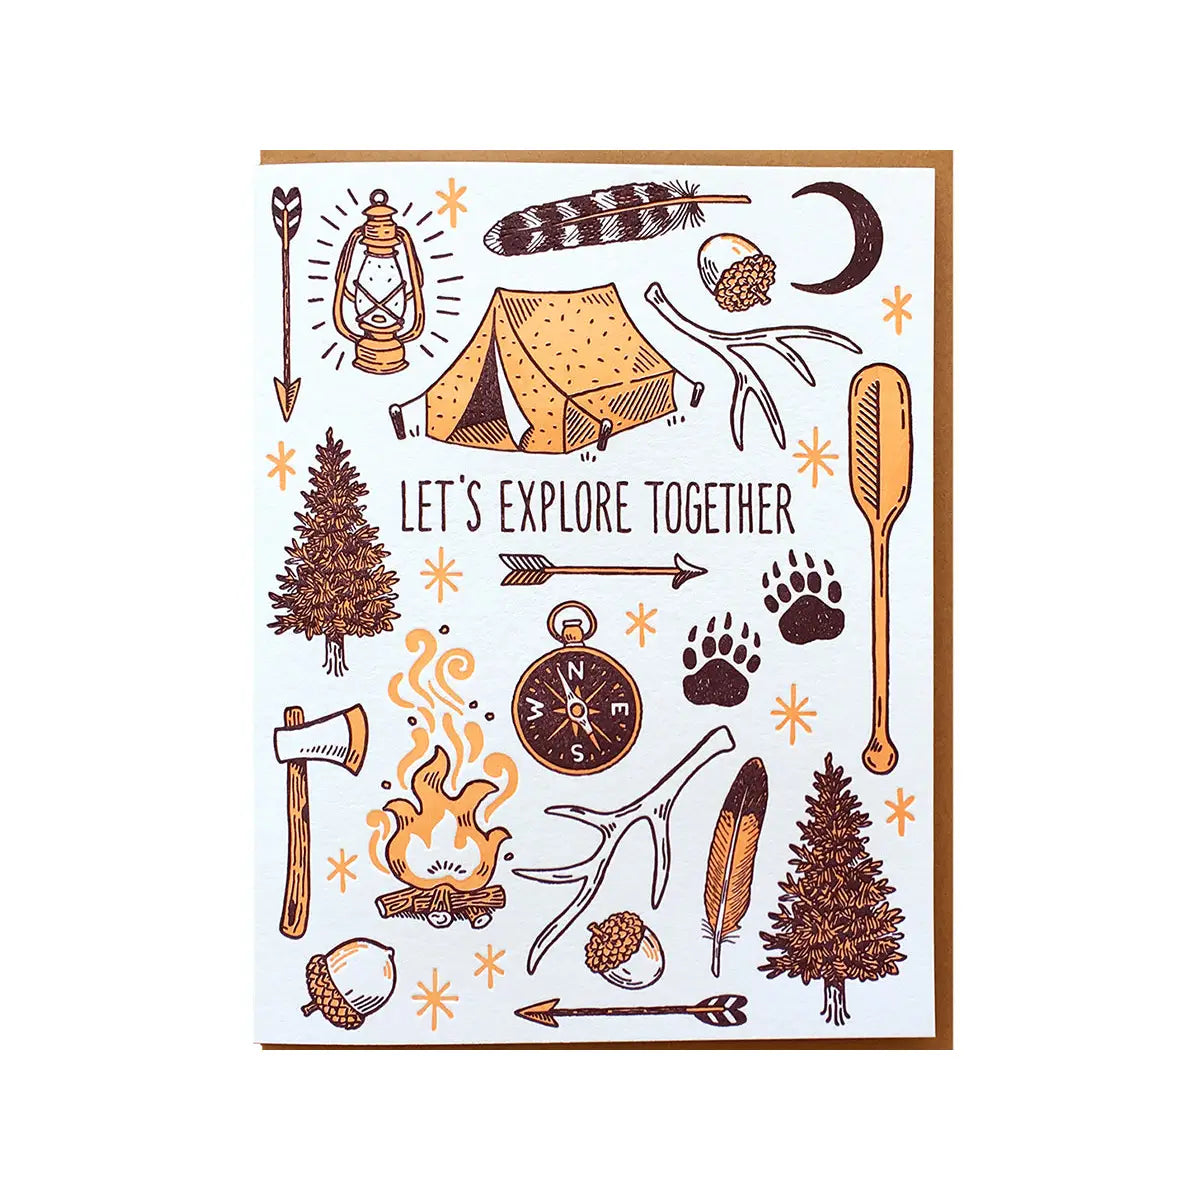 Let's explore together Greeting Card